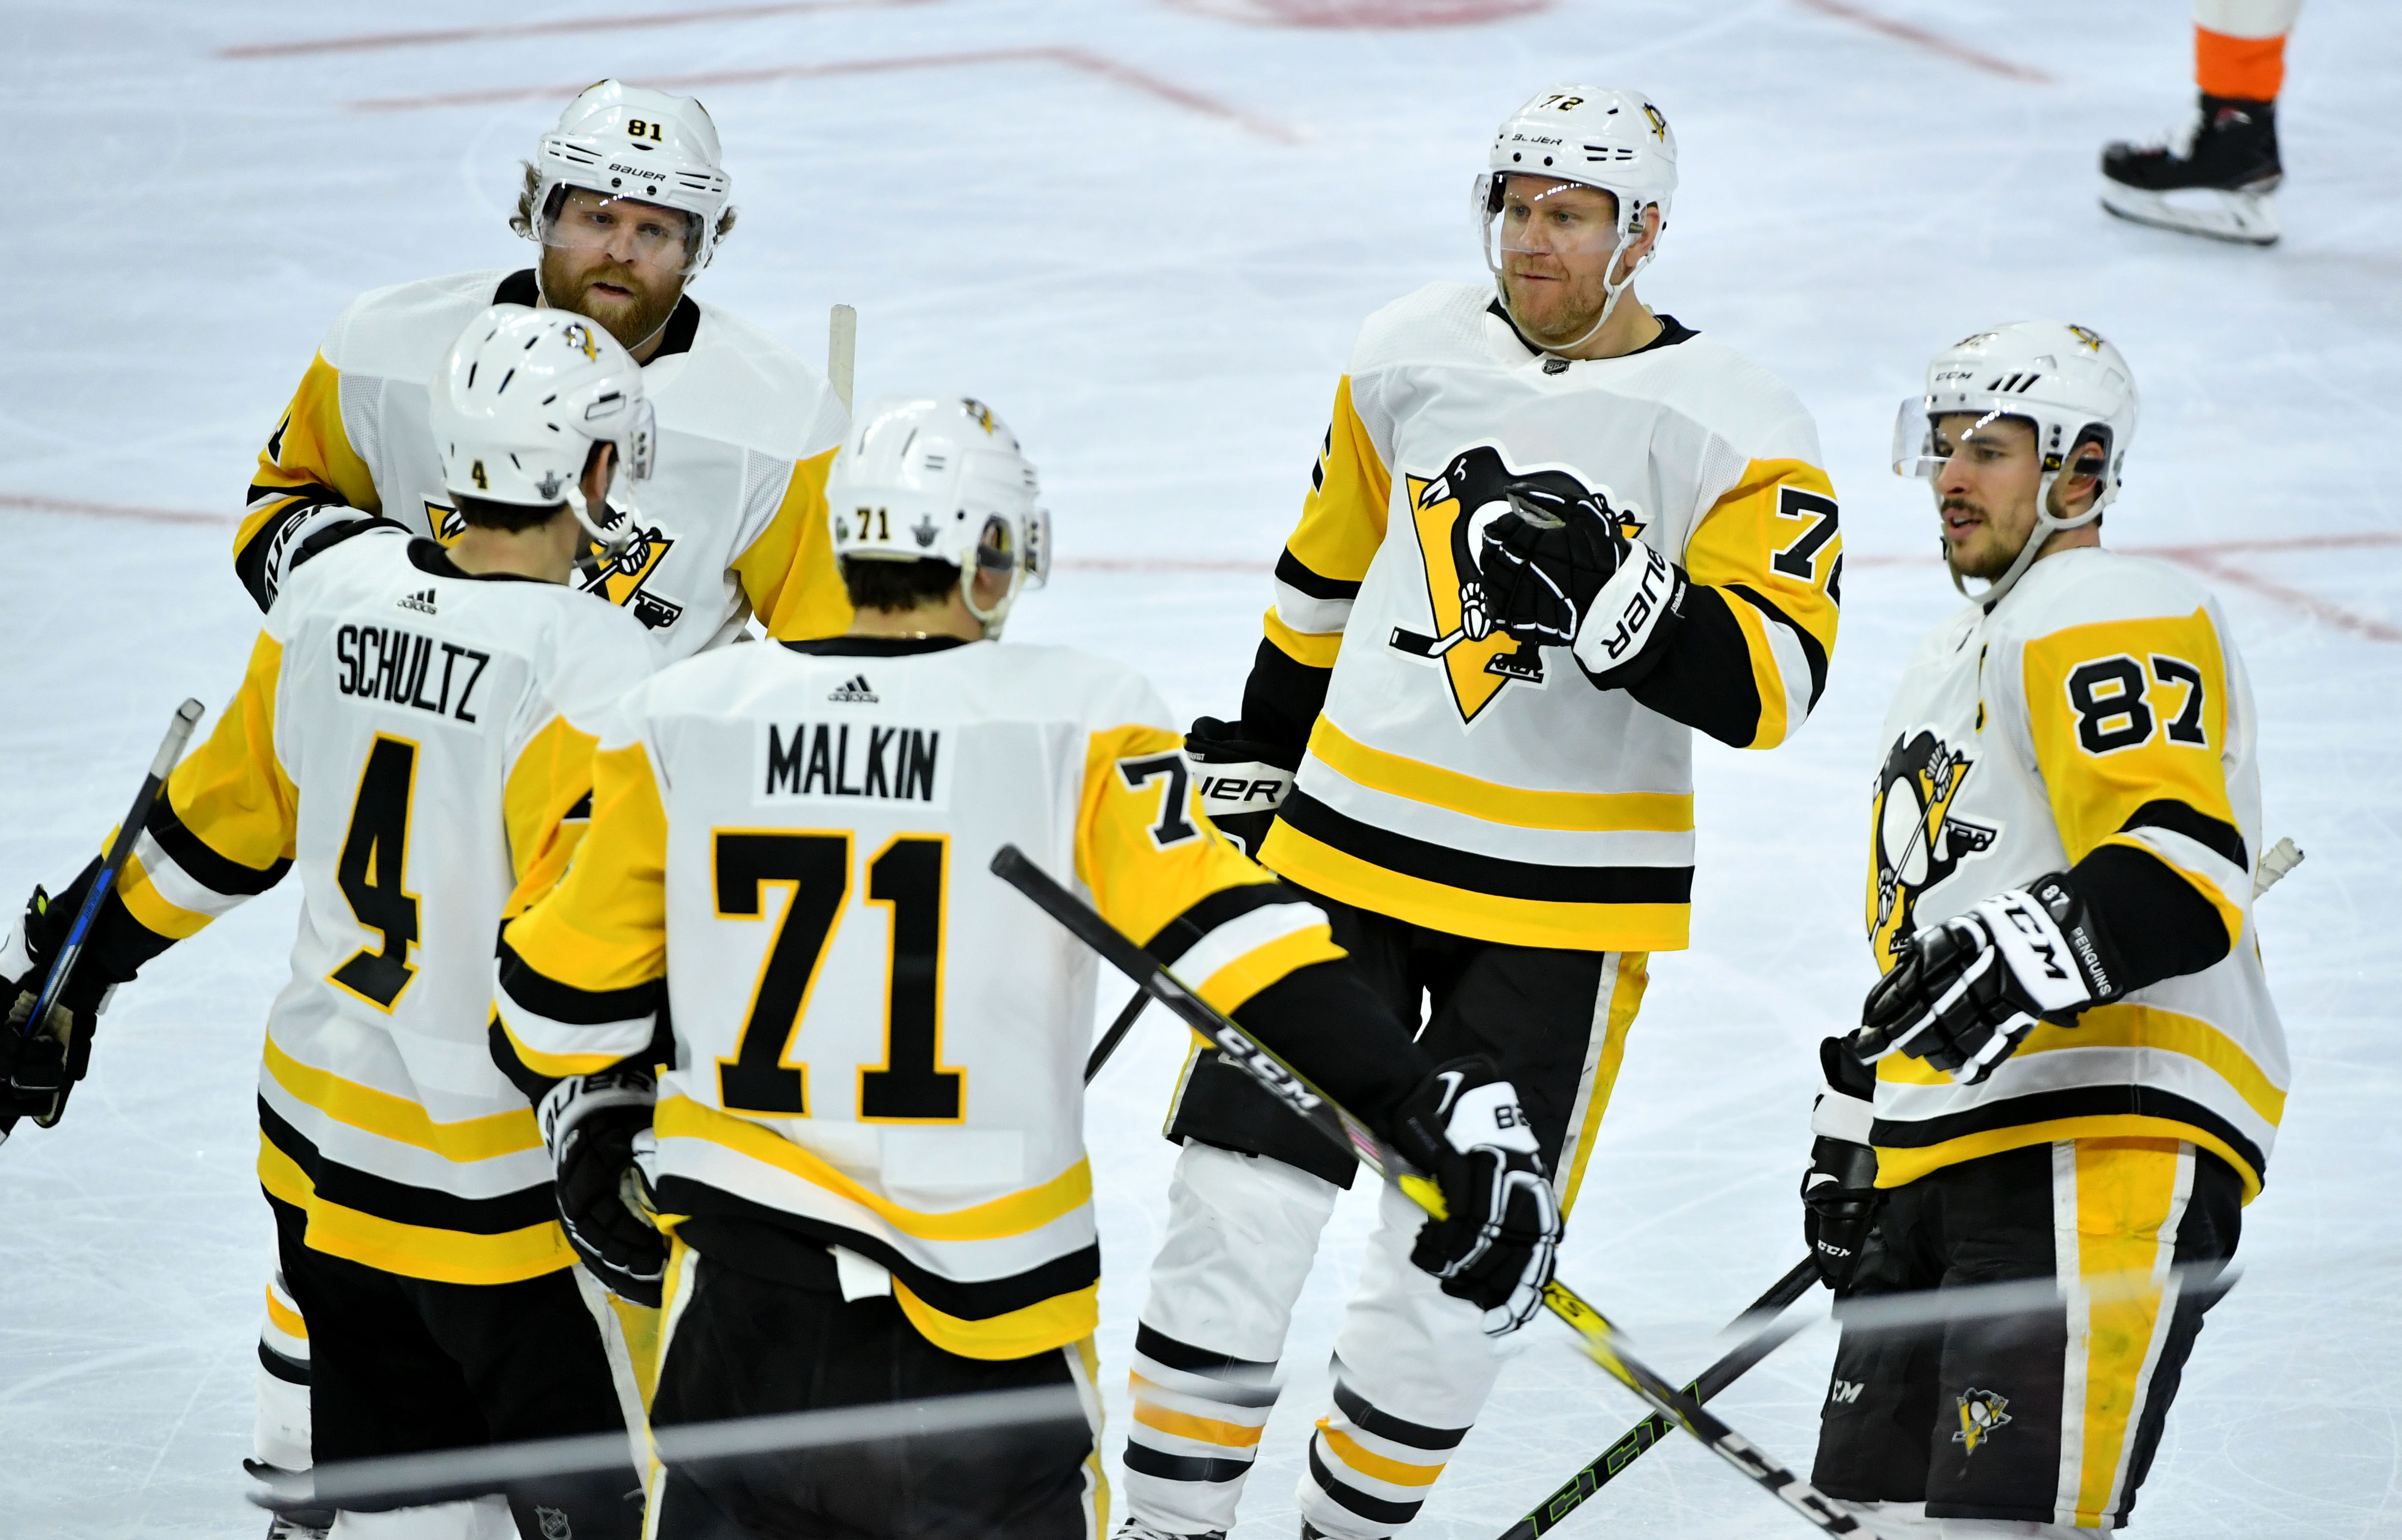 Sidney Crosby Pens’ alltime leader in playoff points after